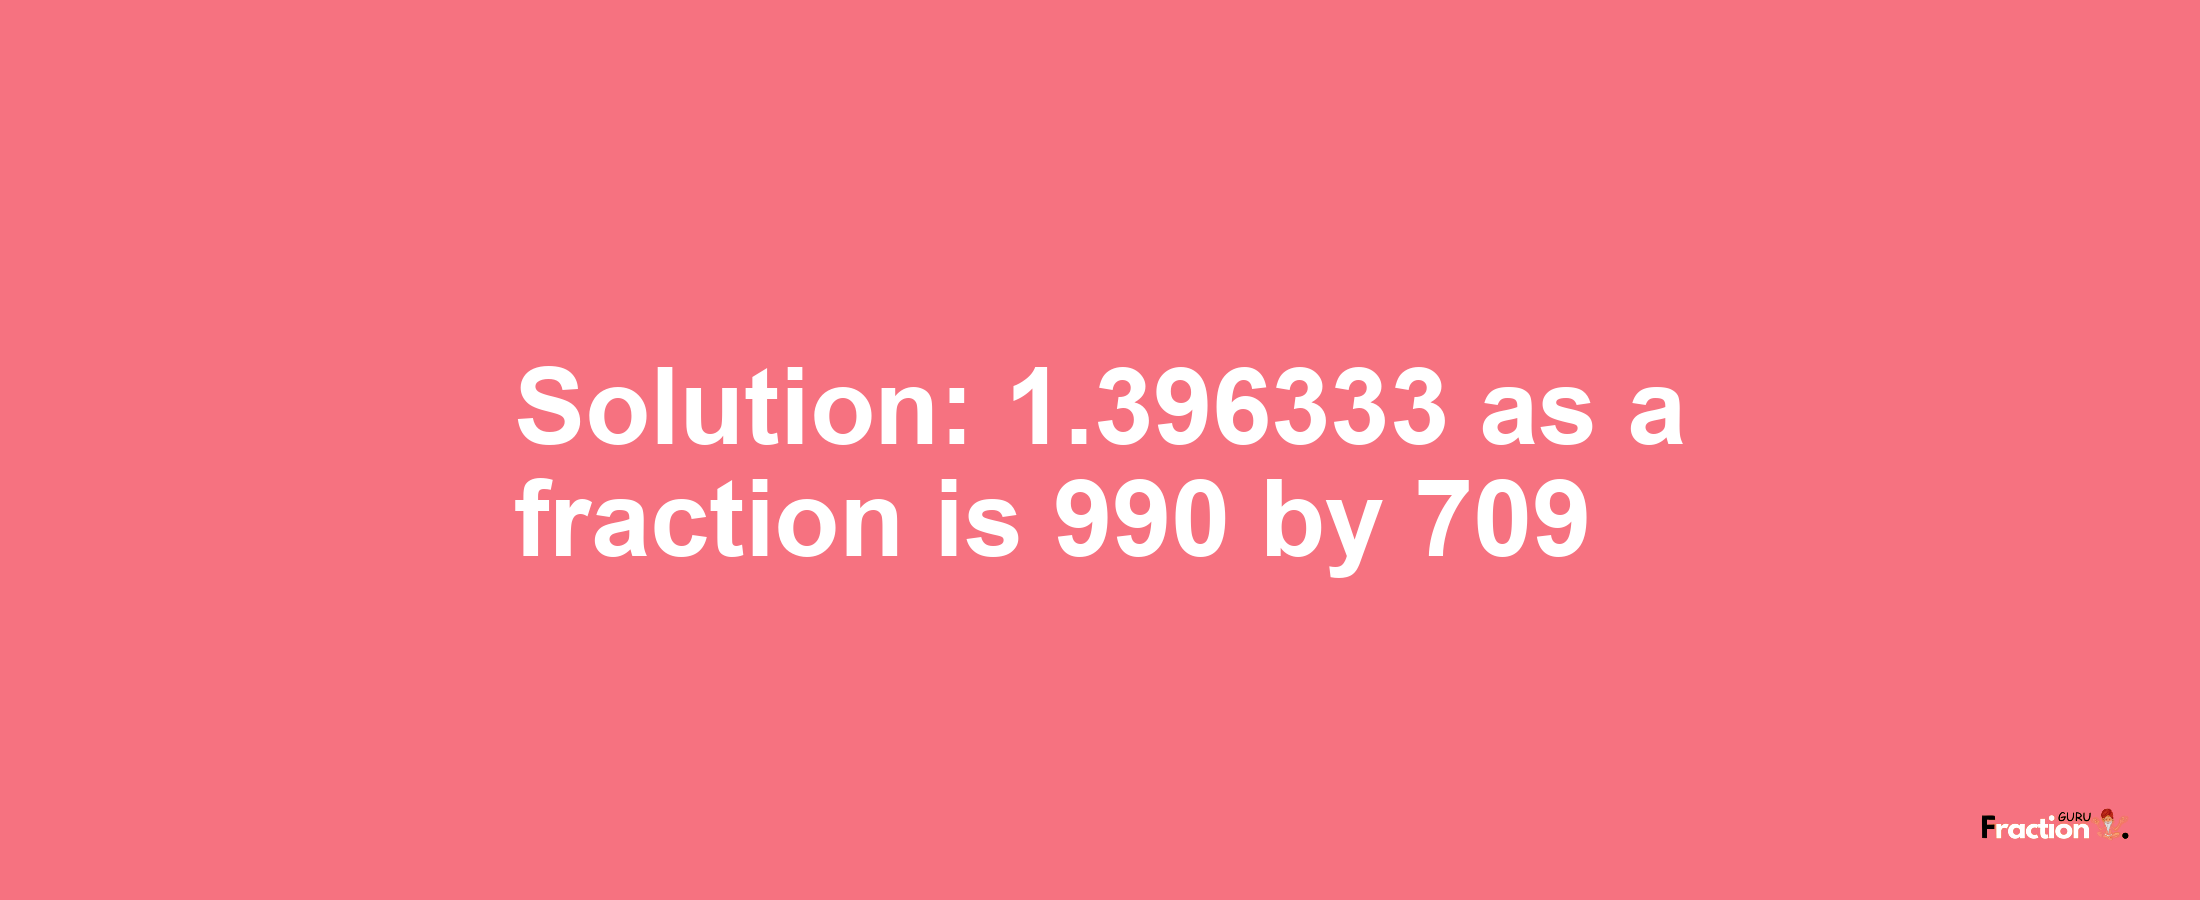 Solution:1.396333 as a fraction is 990/709